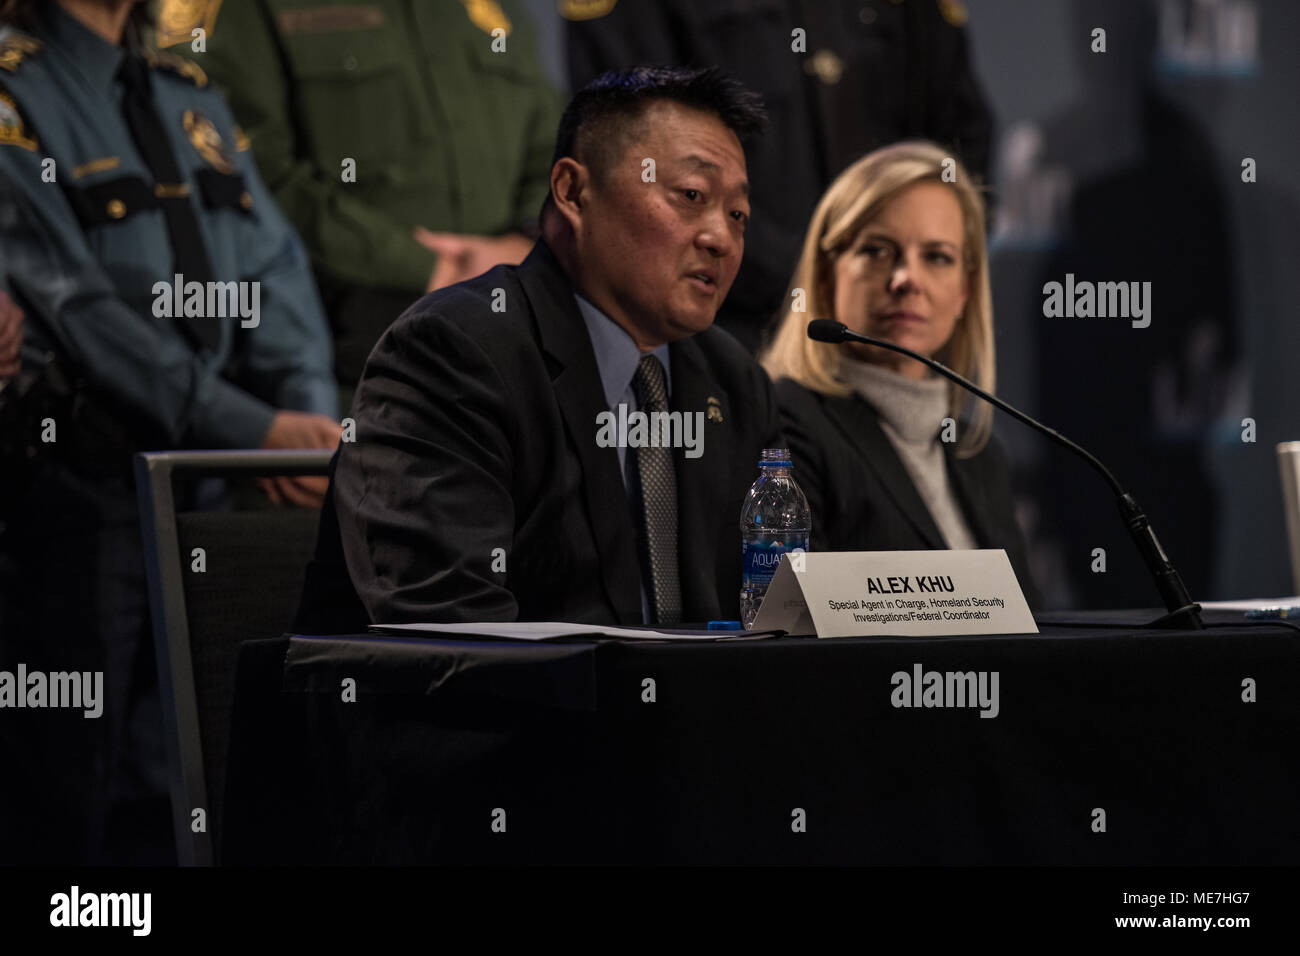 U.S. Homeland Security Special Agent in Charge Alex Khu speaks during the National Football League (NFL) Security Press Conference at the Hilton Minneapolis prior to the Super Bowl LII January 31, 2018 in Minneapolis, Minnesota.    (photo by Josh Denmark via Planetpix) Stock Photo